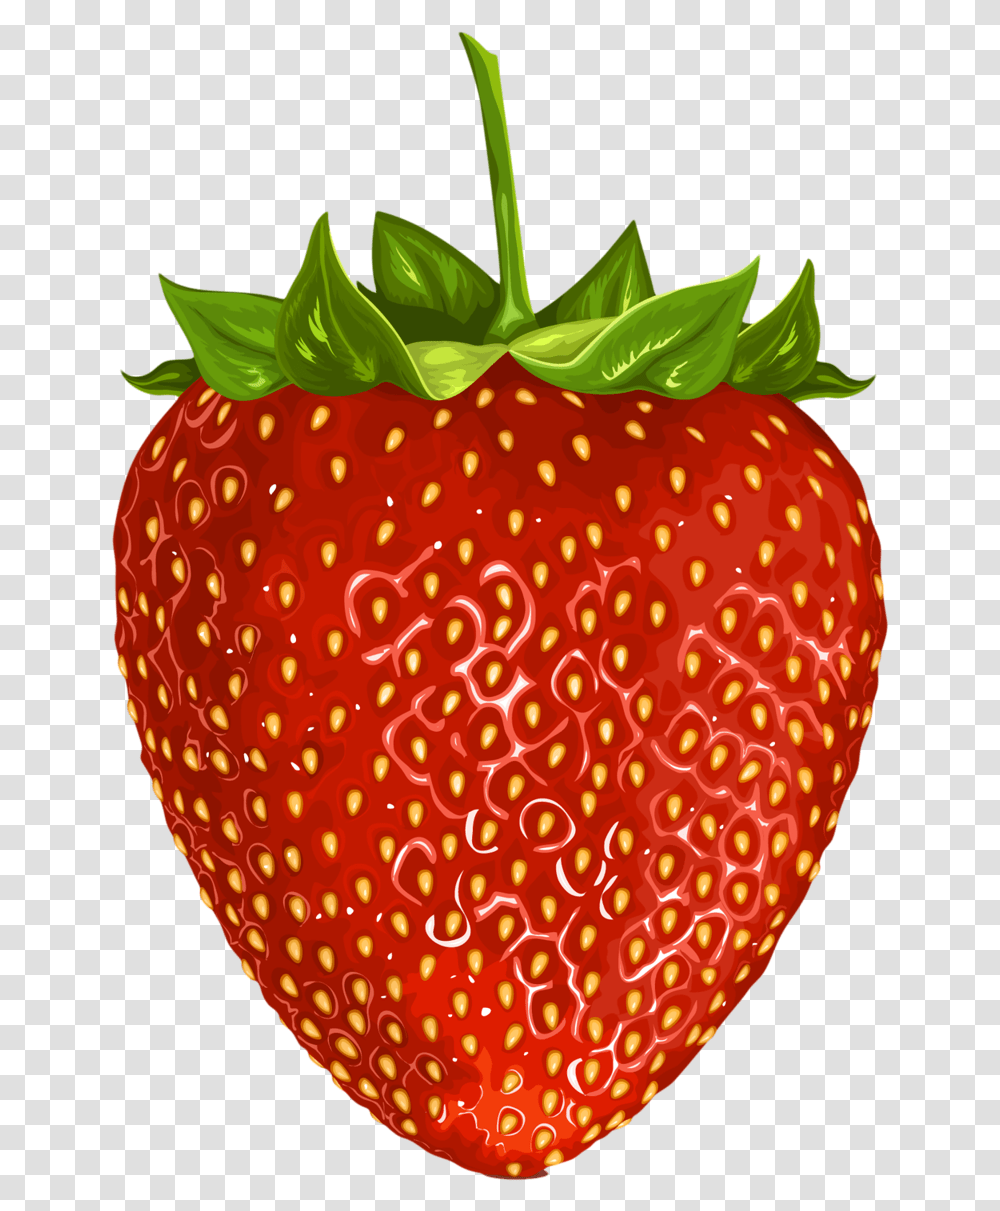 Fotki Fruit Clipart Food Clipart Fruits Images Fruits Bunch Of Fruit Clipart, Strawberry, Plant Transparent Png